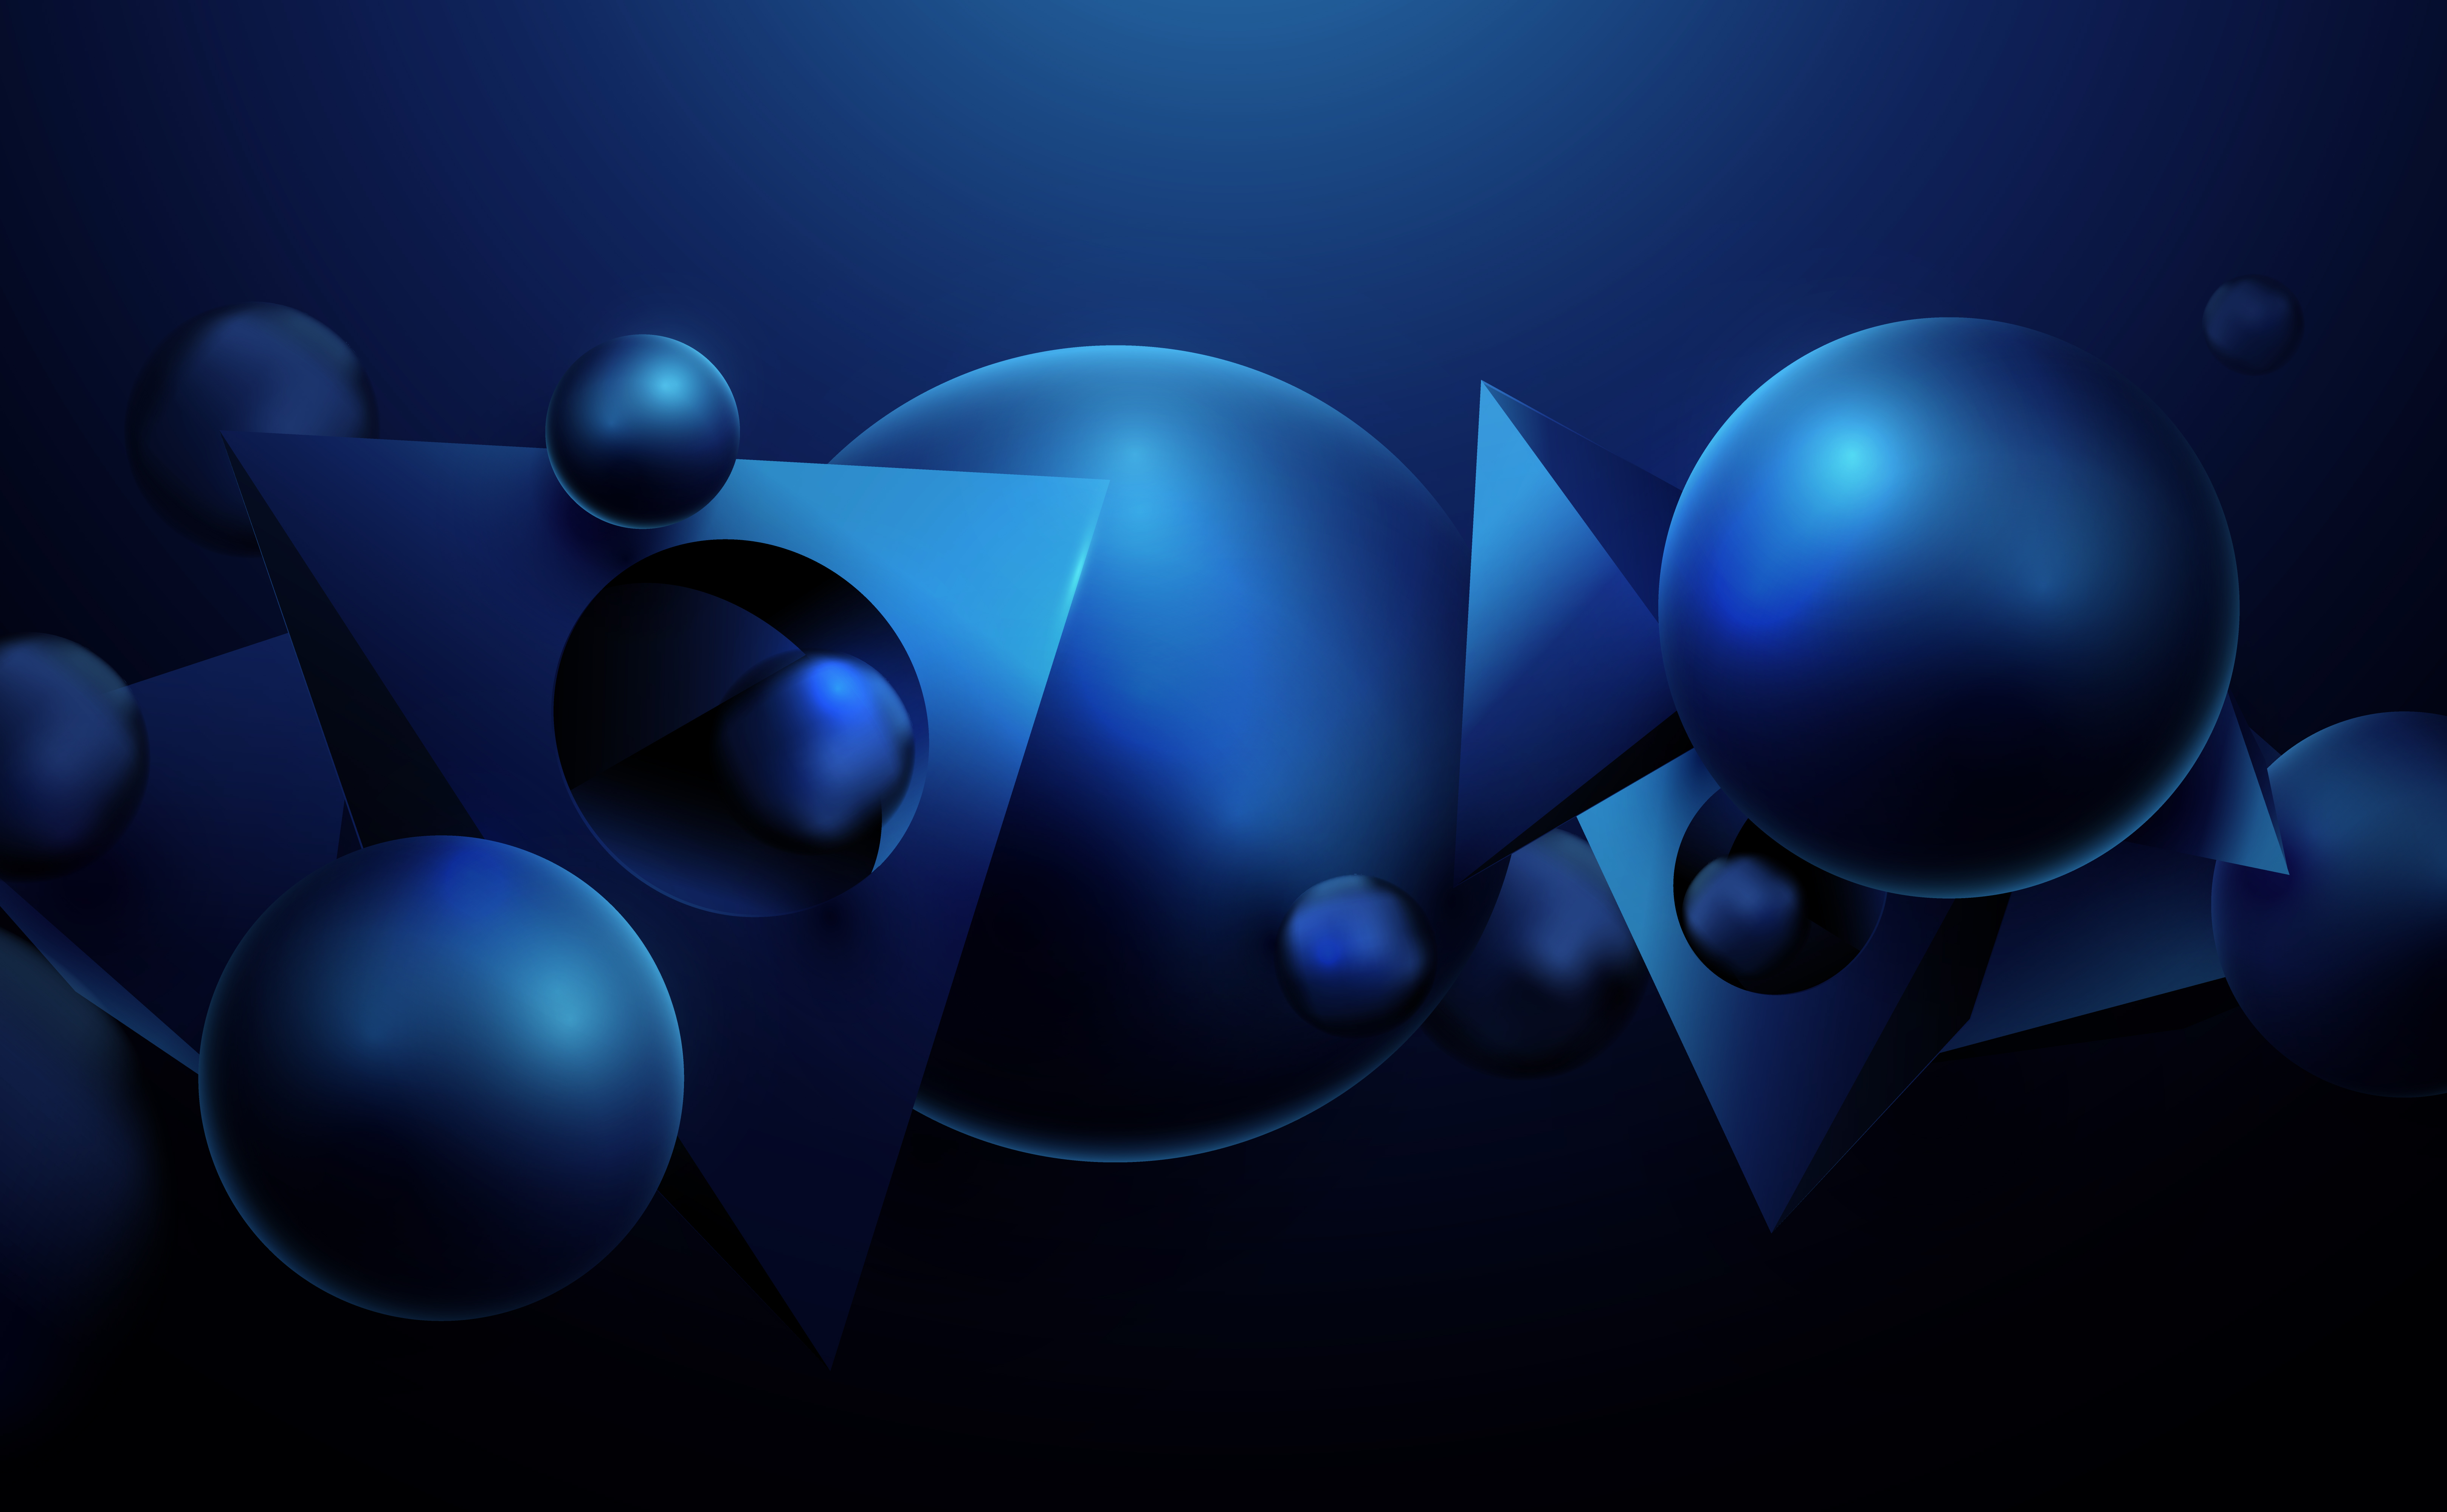 Minimalism 3D Abstract Simple Background Sphere Pyramid 6472x4000